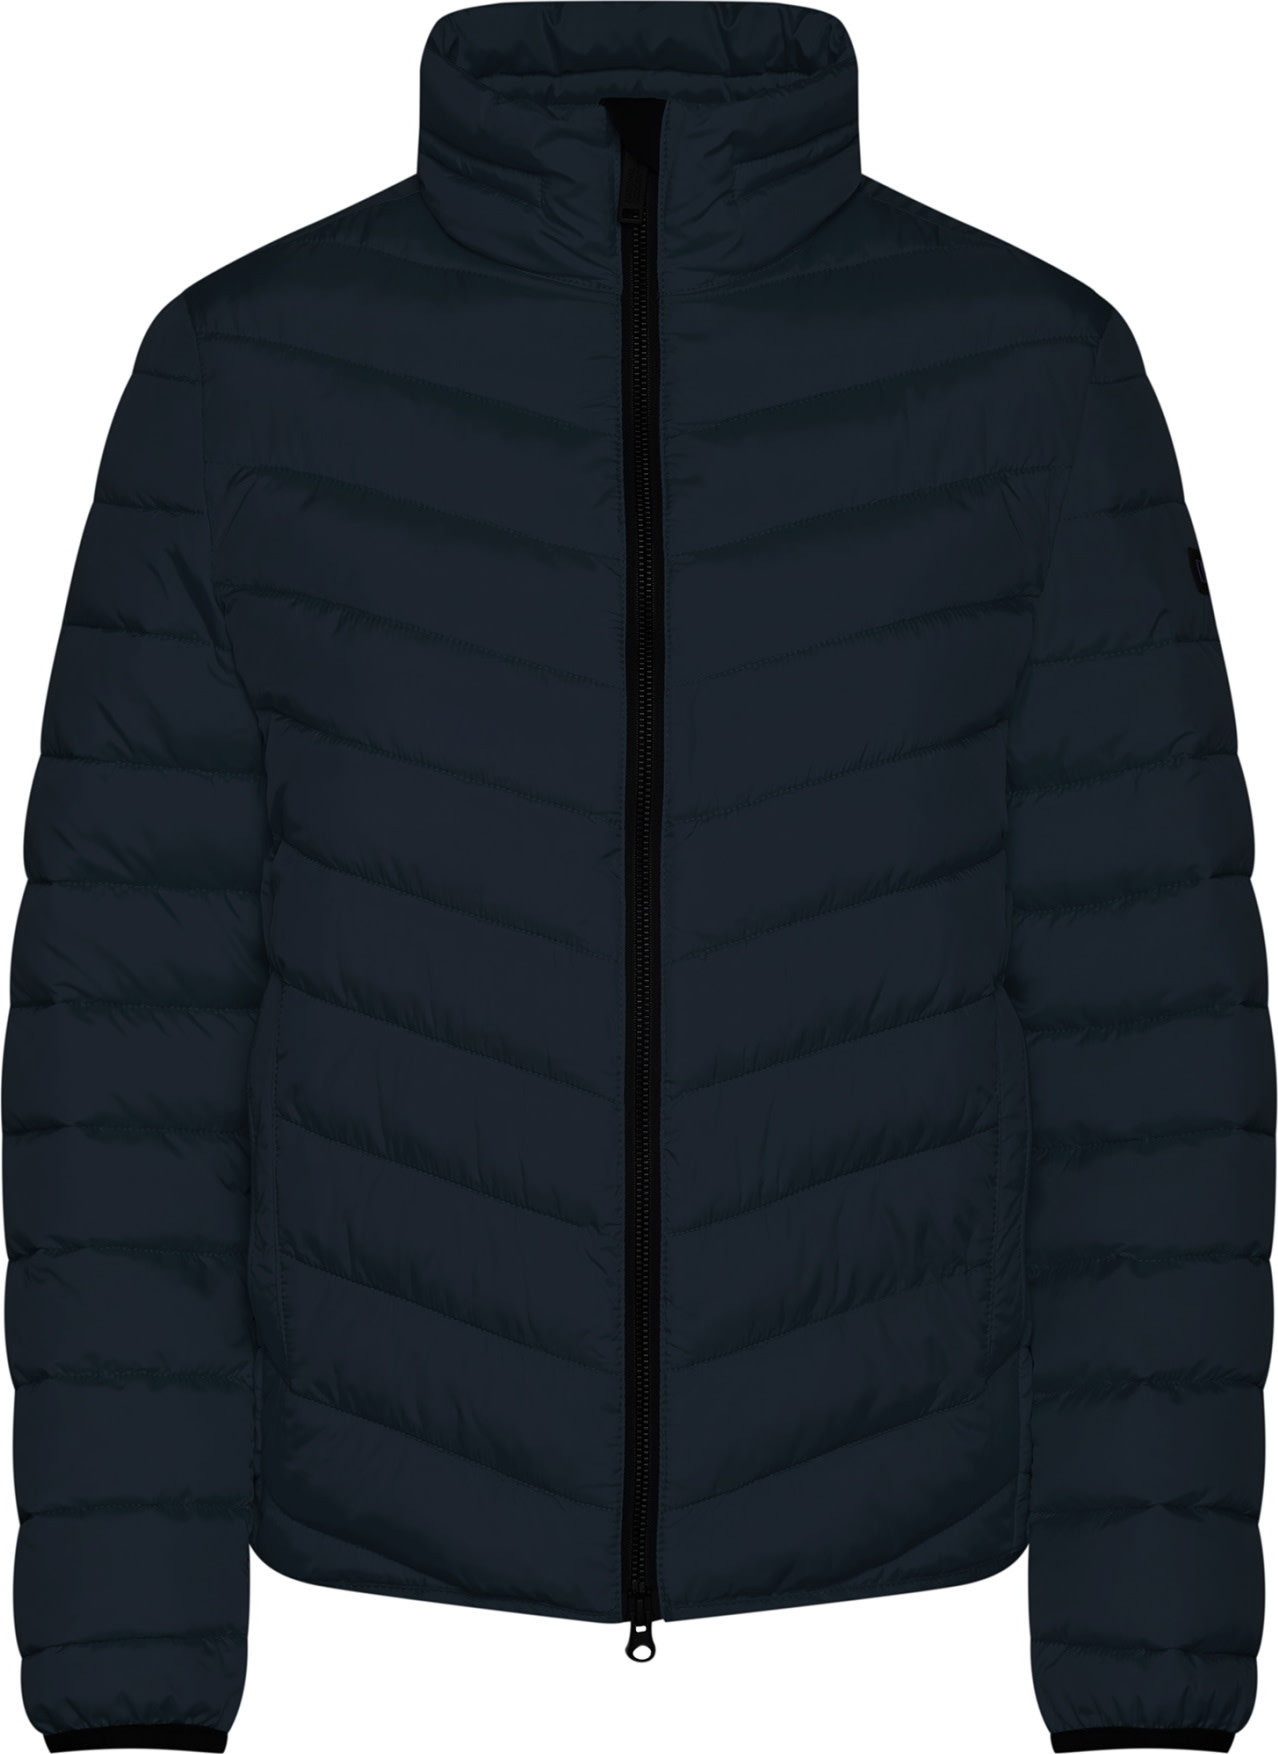 National Geographic Women’s Puffer Jacket navyblue